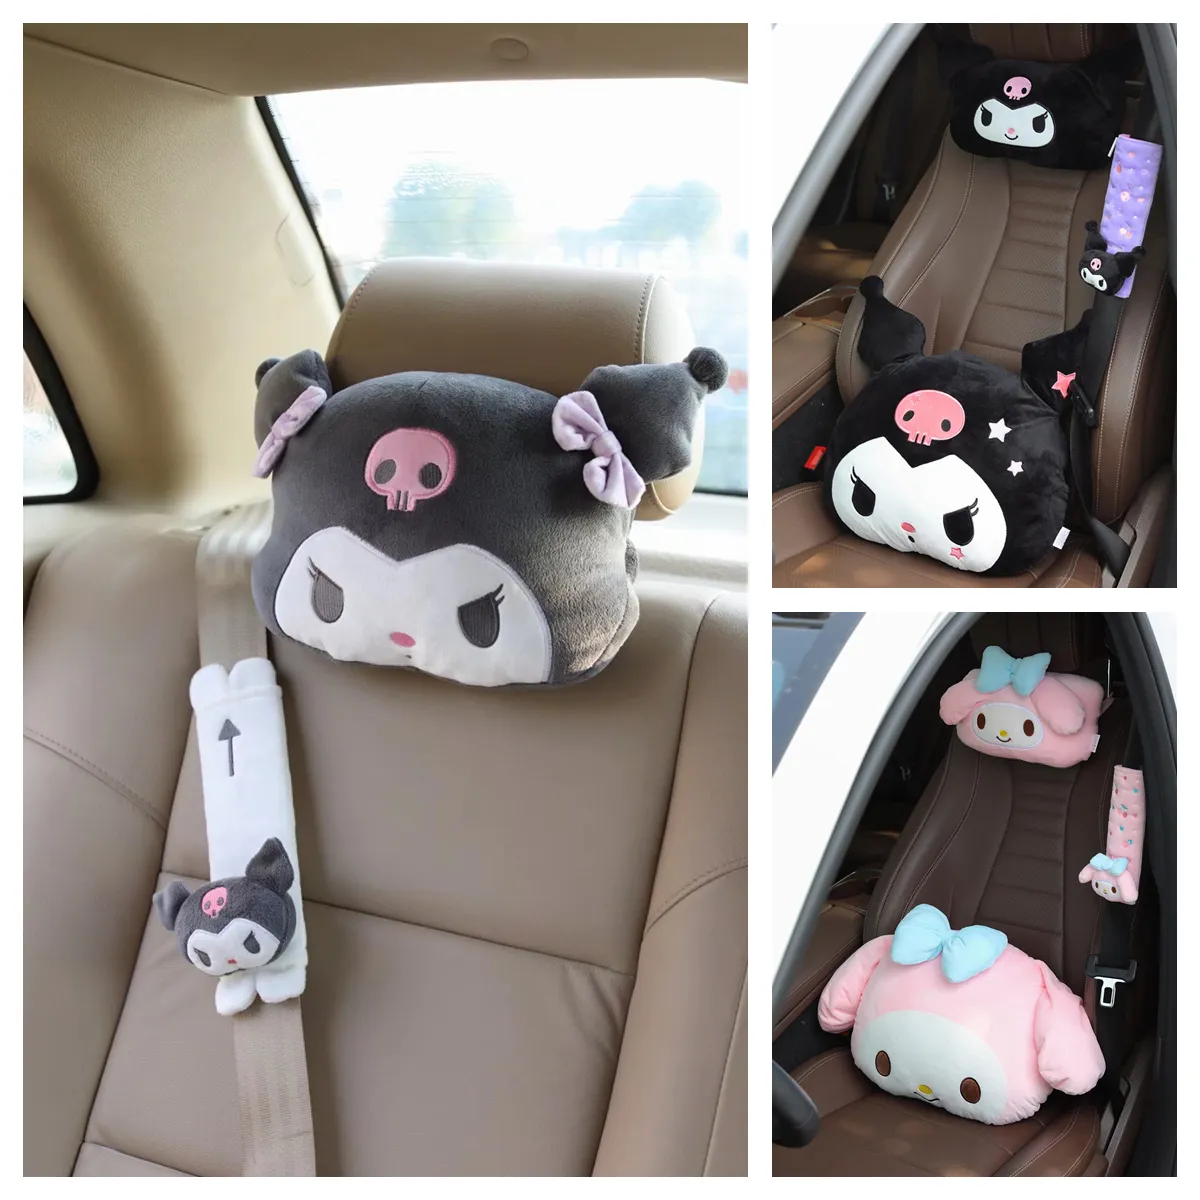 Japanese Anime Headrest For Car Chair Kawaii Seat Belt Cover Shoulder Pads Cartoon Melodyed Kuromied Plush Toys Gift For Girl